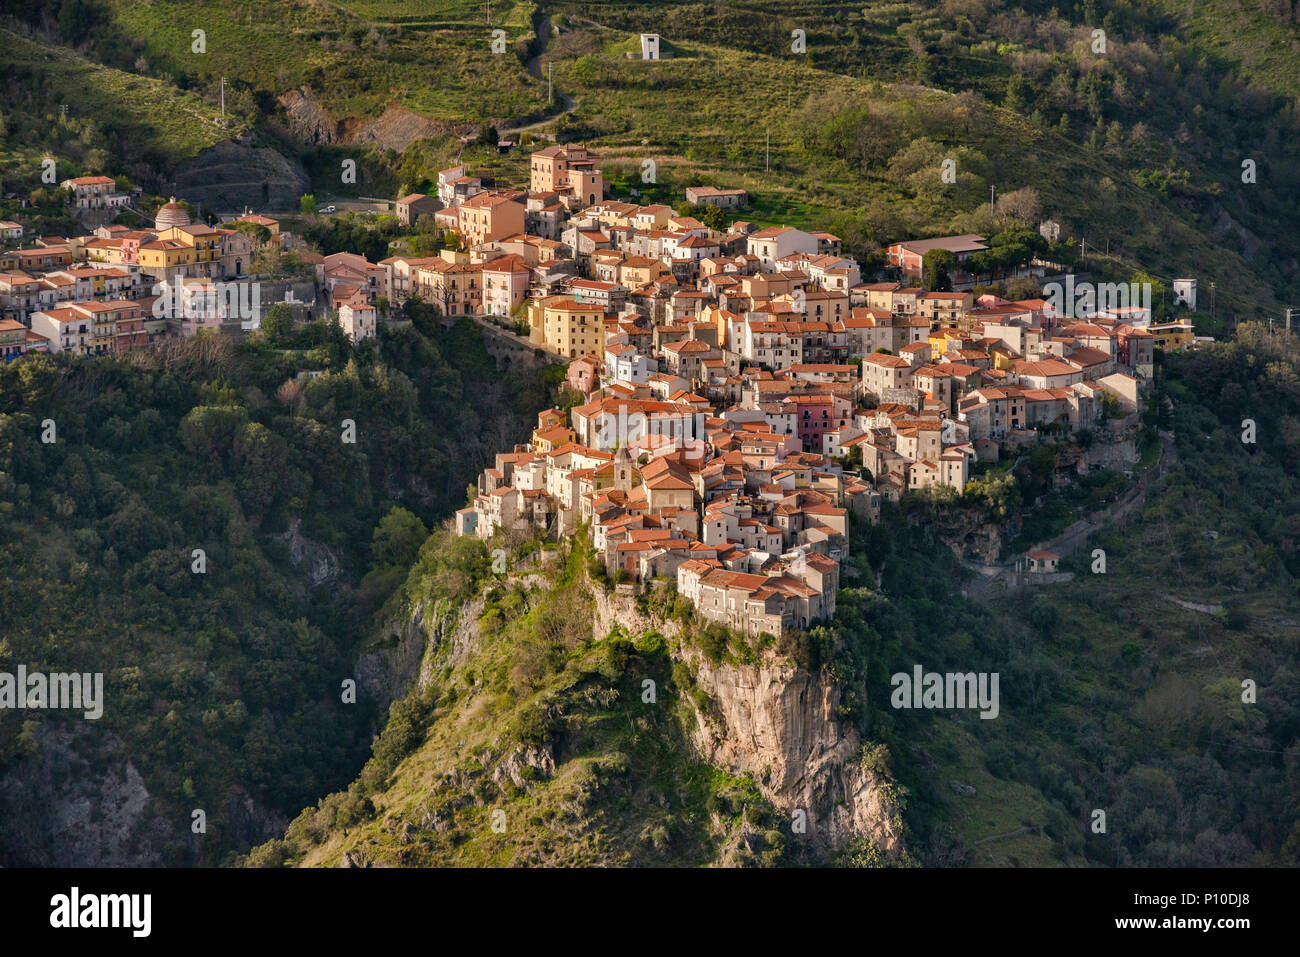 Hill town of Tortora, view from road to Aieta, Alto Tirreno Cosentino, Pollino National Park, Southern Apennines, Calabria, Italy Stock Photo